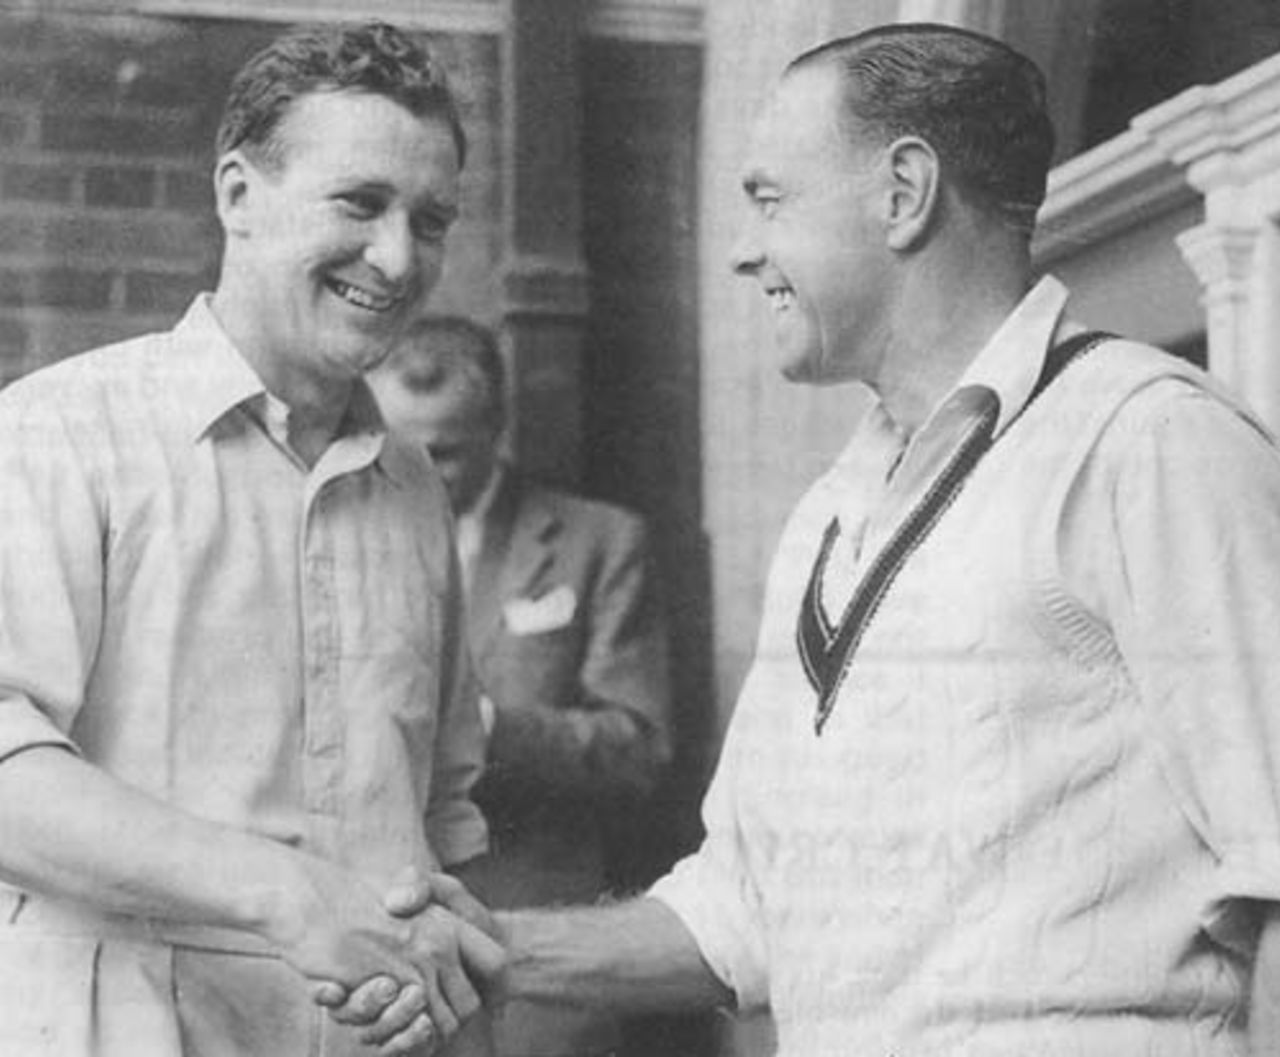 Jim Laker is congratulated by Ian Johnson after taking 19 wickets, England v Australia, Manchester, July 31, 1956